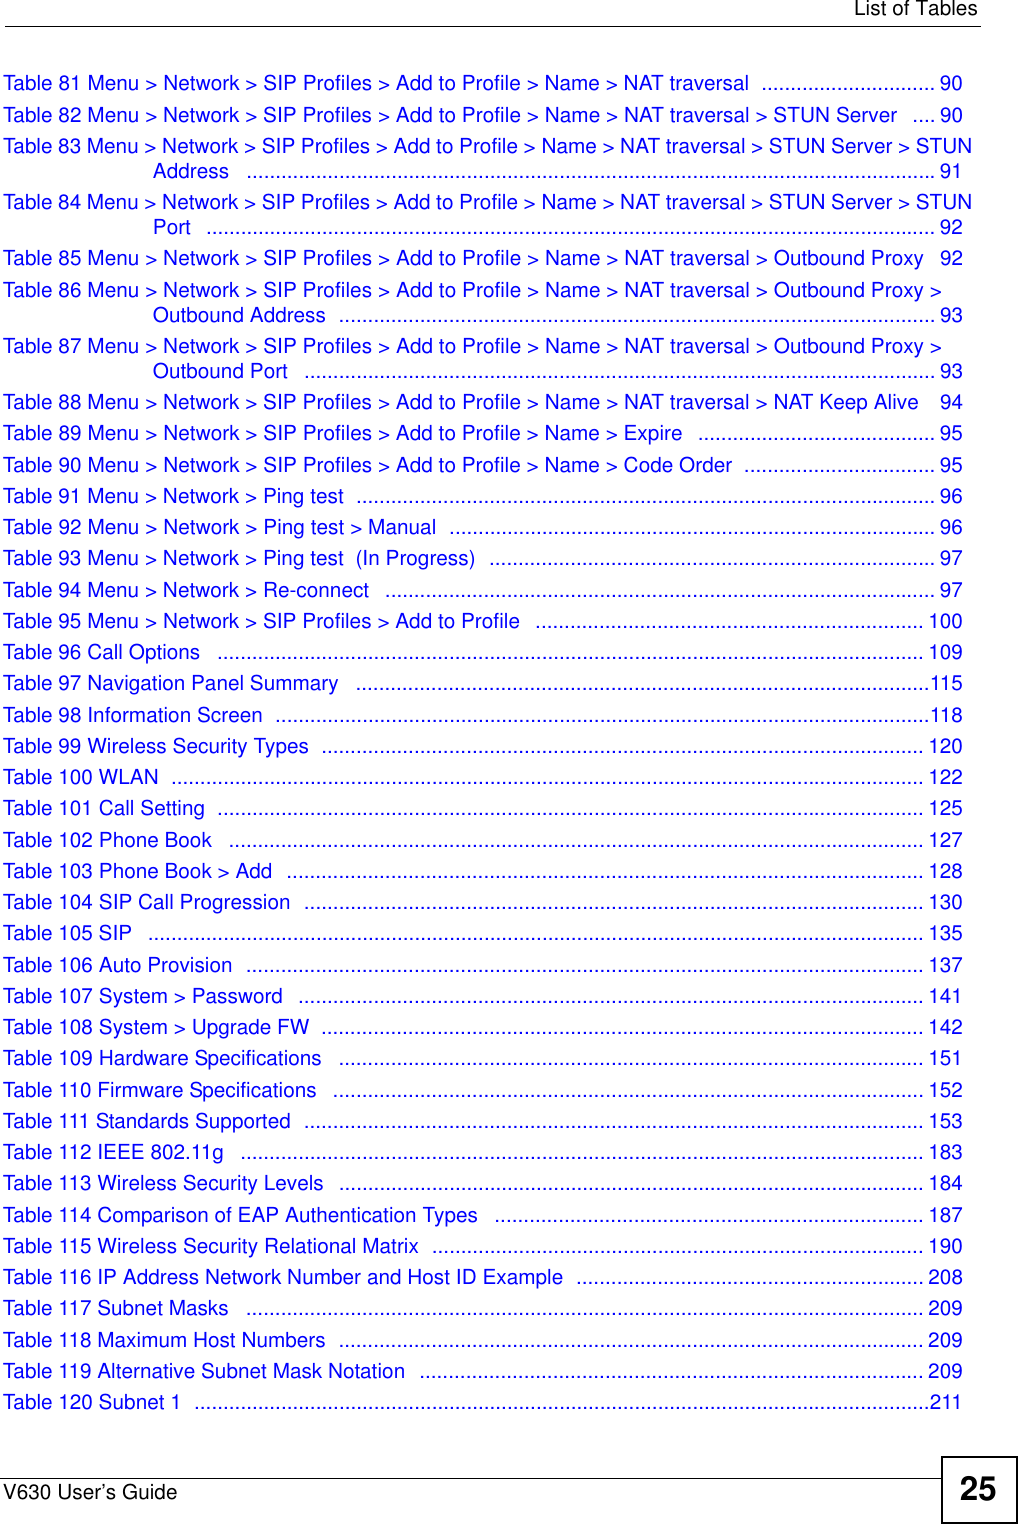   List of TablesV630 User’s Guide 25Table 81 Menu &gt; Network &gt; SIP Profiles &gt; Add to Profile &gt; Name &gt; NAT traversal  .............................. 90Table 82 Menu &gt; Network &gt; SIP Profiles &gt; Add to Profile &gt; Name &gt; NAT traversal &gt; STUN Server   .... 90Table 83 Menu &gt; Network &gt; SIP Profiles &gt; Add to Profile &gt; Name &gt; NAT traversal &gt; STUN Server &gt; STUN Address   .......................................................................................................................91Table 84 Menu &gt; Network &gt; SIP Profiles &gt; Add to Profile &gt; Name &gt; NAT traversal &gt; STUN Server &gt; STUN Port   .............................................................................................................................. 92Table 85 Menu &gt; Network &gt; SIP Profiles &gt; Add to Profile &gt; Name &gt; NAT traversal &gt; Outbound Proxy   92Table 86 Menu &gt; Network &gt; SIP Profiles &gt; Add to Profile &gt; Name &gt; NAT traversal &gt; Outbound Proxy &gt; Outbound Address  ....................................................................................................... 93Table 87 Menu &gt; Network &gt; SIP Profiles &gt; Add to Profile &gt; Name &gt; NAT traversal &gt; Outbound Proxy &gt; Outbound Port   ............................................................................................................. 93Table 88 Menu &gt; Network &gt; SIP Profiles &gt; Add to Profile &gt; Name &gt; NAT traversal &gt; NAT Keep Alive   94Table 89 Menu &gt; Network &gt; SIP Profiles &gt; Add to Profile &gt; Name &gt; Expire   ......................................... 95Table 90 Menu &gt; Network &gt; SIP Profiles &gt; Add to Profile &gt; Name &gt; Code Order  ................................. 95Table 91 Menu &gt; Network &gt; Ping test  .................................................................................................... 96Table 92 Menu &gt; Network &gt; Ping test &gt; Manual  .................................................................................... 96Table 93 Menu &gt; Network &gt; Ping test  (In Progress)  ............................................................................. 97Table 94 Menu &gt; Network &gt; Re-connect   ............................................................................................... 97Table 95 Menu &gt; Network &gt; SIP Profiles &gt; Add to Profile   ................................................................... 100Table 96 Call Options   .......................................................................................................................... 109Table 97 Navigation Panel Summary   ...................................................................................................115Table 98 Information Screen  .................................................................................................................118Table 99 Wireless Security Types  ........................................................................................................ 120Table 100 WLAN  .................................................................................................................................. 122Table 101 Call Setting  .......................................................................................................................... 125Table 102 Phone Book   ........................................................................................................................ 127Table 103 Phone Book &gt; Add  .............................................................................................................. 128Table 104 SIP Call Progression  ........................................................................................................... 130Table 105 SIP   ...................................................................................................................................... 135Table 106 Auto Provision  ..................................................................................................................... 137Table 107 System &gt; Password   ............................................................................................................ 141Table 108 System &gt; Upgrade FW  ........................................................................................................ 142Table 109 Hardware Specifications   ..................................................................................................... 151Table 110 Firmware Specifications   ...................................................................................................... 152Table 111 Standards Supported  ........................................................................................................... 153Table 112 IEEE 802.11g   ...................................................................................................................... 183Table 113 Wireless Security Levels   ..................................................................................................... 184Table 114 Comparison of EAP Authentication Types   .......................................................................... 187Table 115 Wireless Security Relational Matrix  ..................................................................................... 190Table 116 IP Address Network Number and Host ID Example  ............................................................ 208Table 117 Subnet Masks   ..................................................................................................................... 209Table 118 Maximum Host Numbers  ..................................................................................................... 209Table 119 Alternative Subnet Mask Notation  ....................................................................................... 209Table 120 Subnet 1  ...............................................................................................................................211